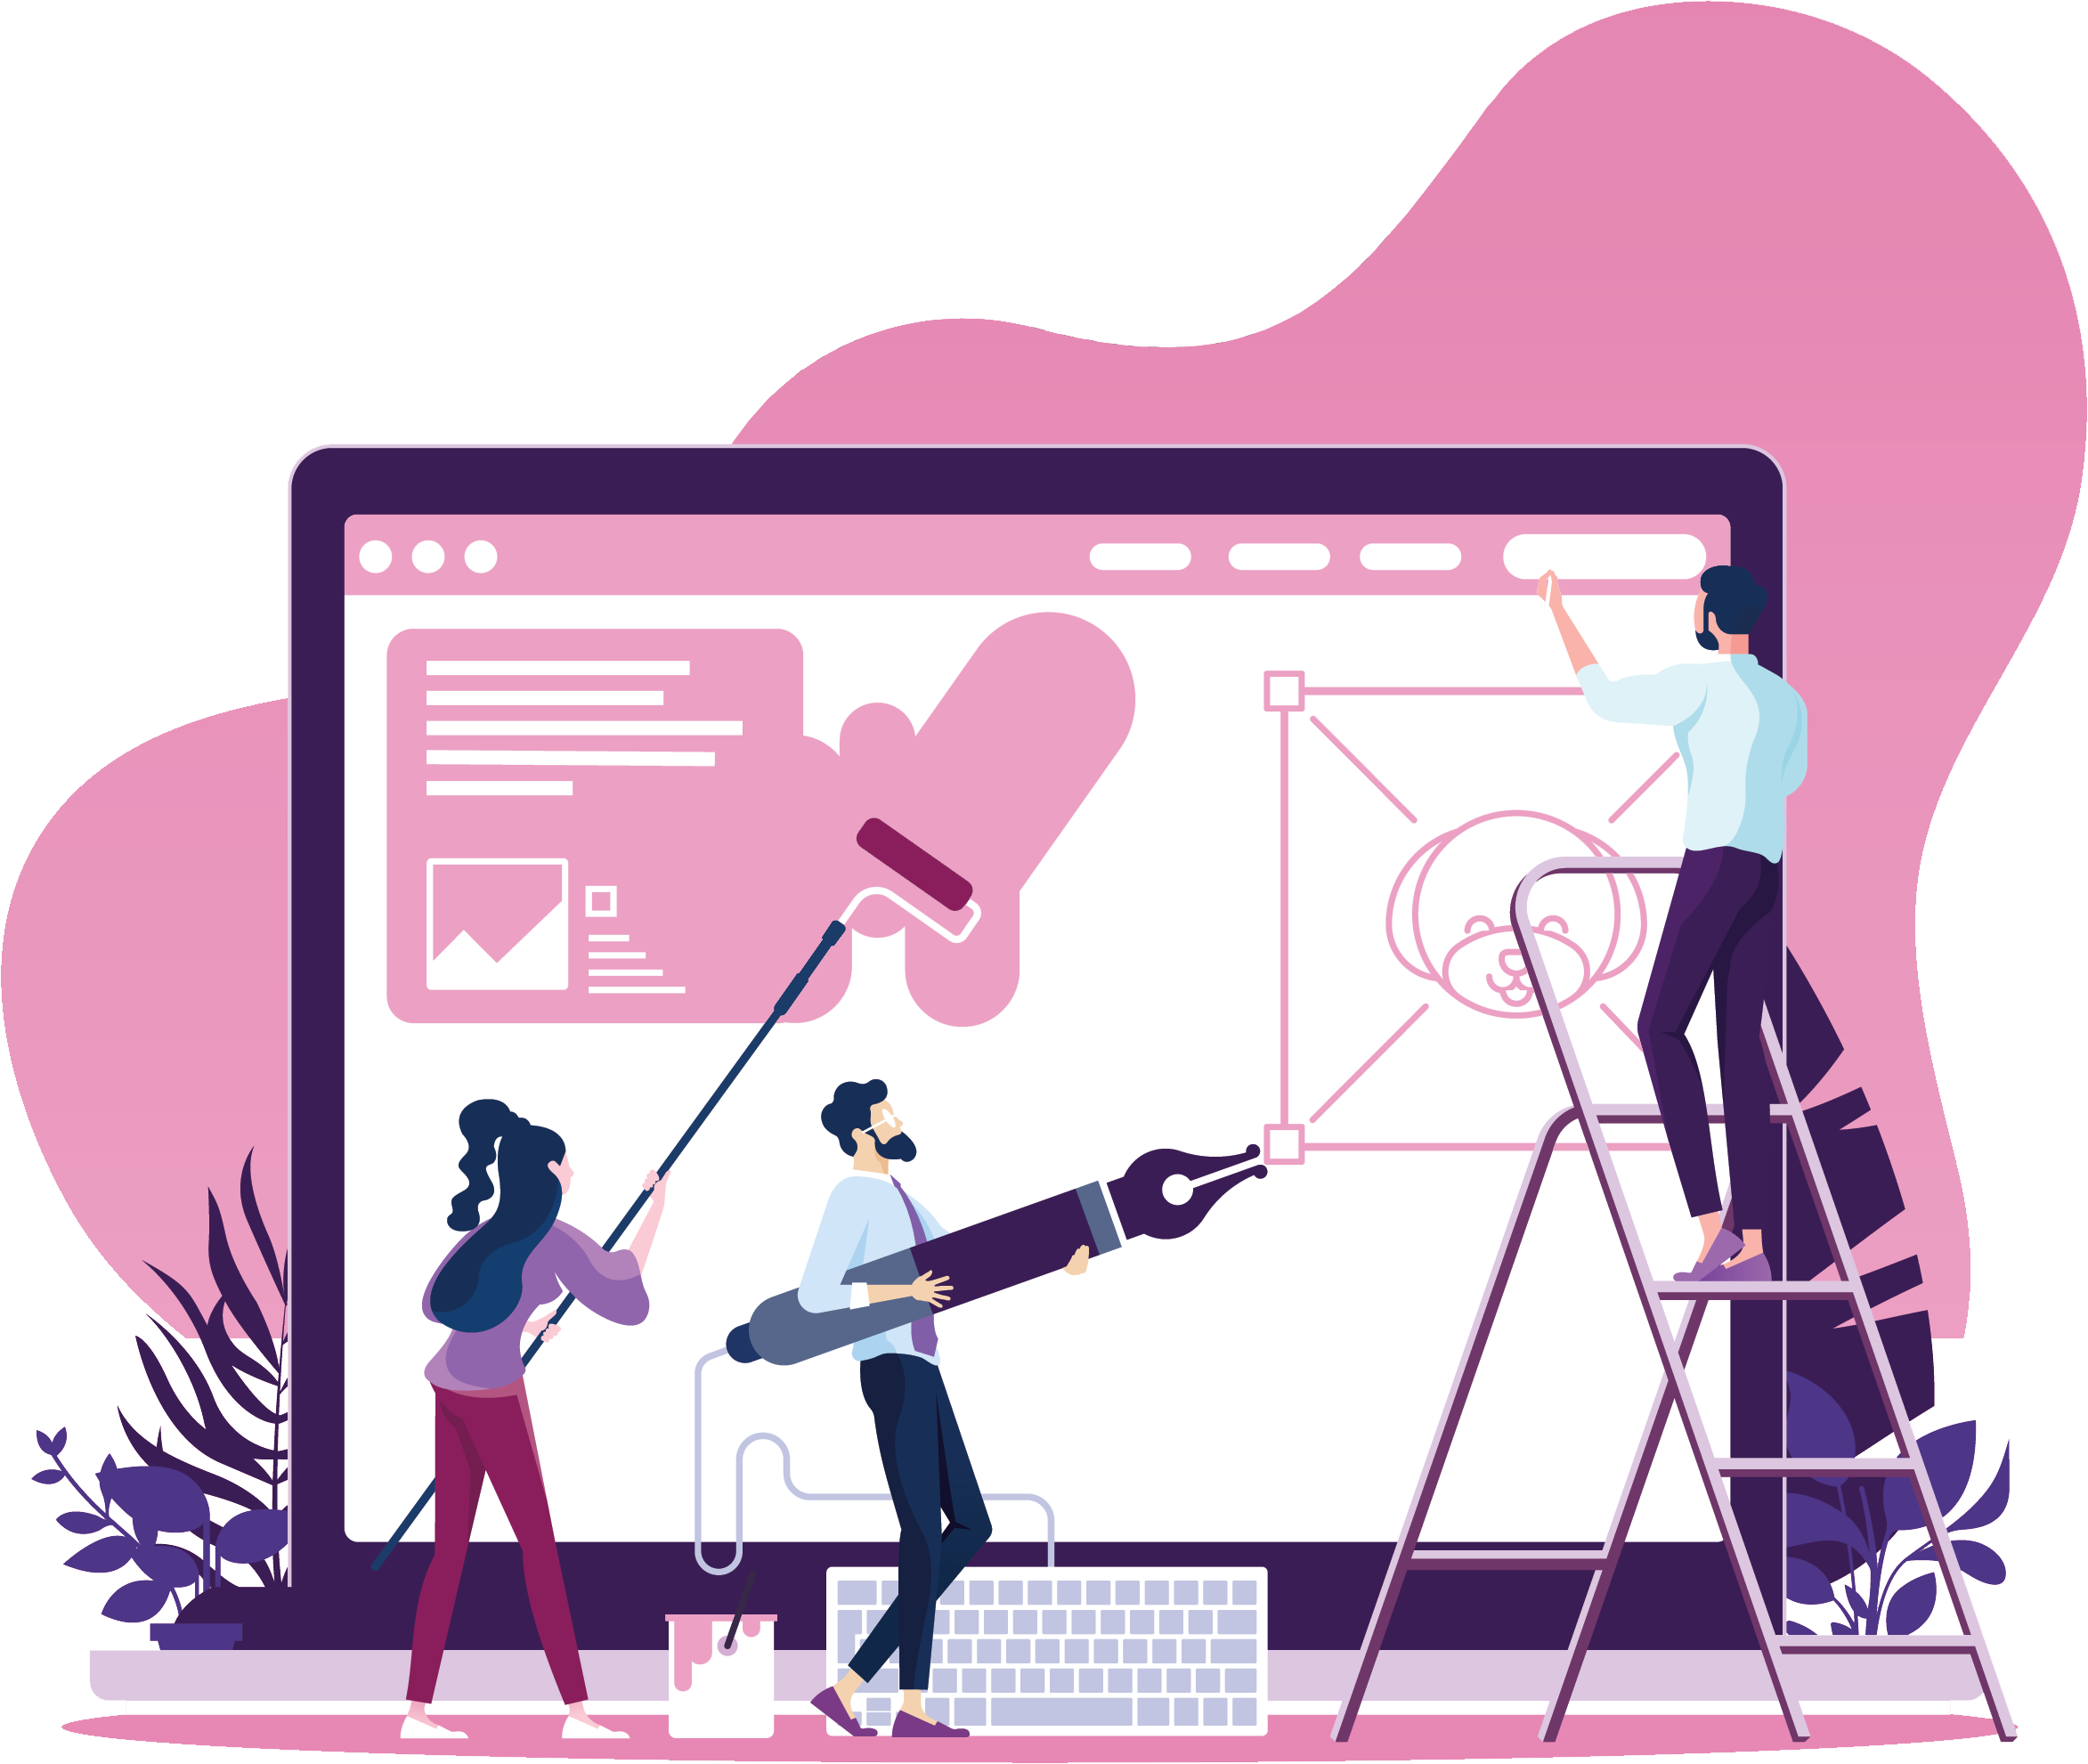 Abstract illustration of people restyling a website on a giant laptop